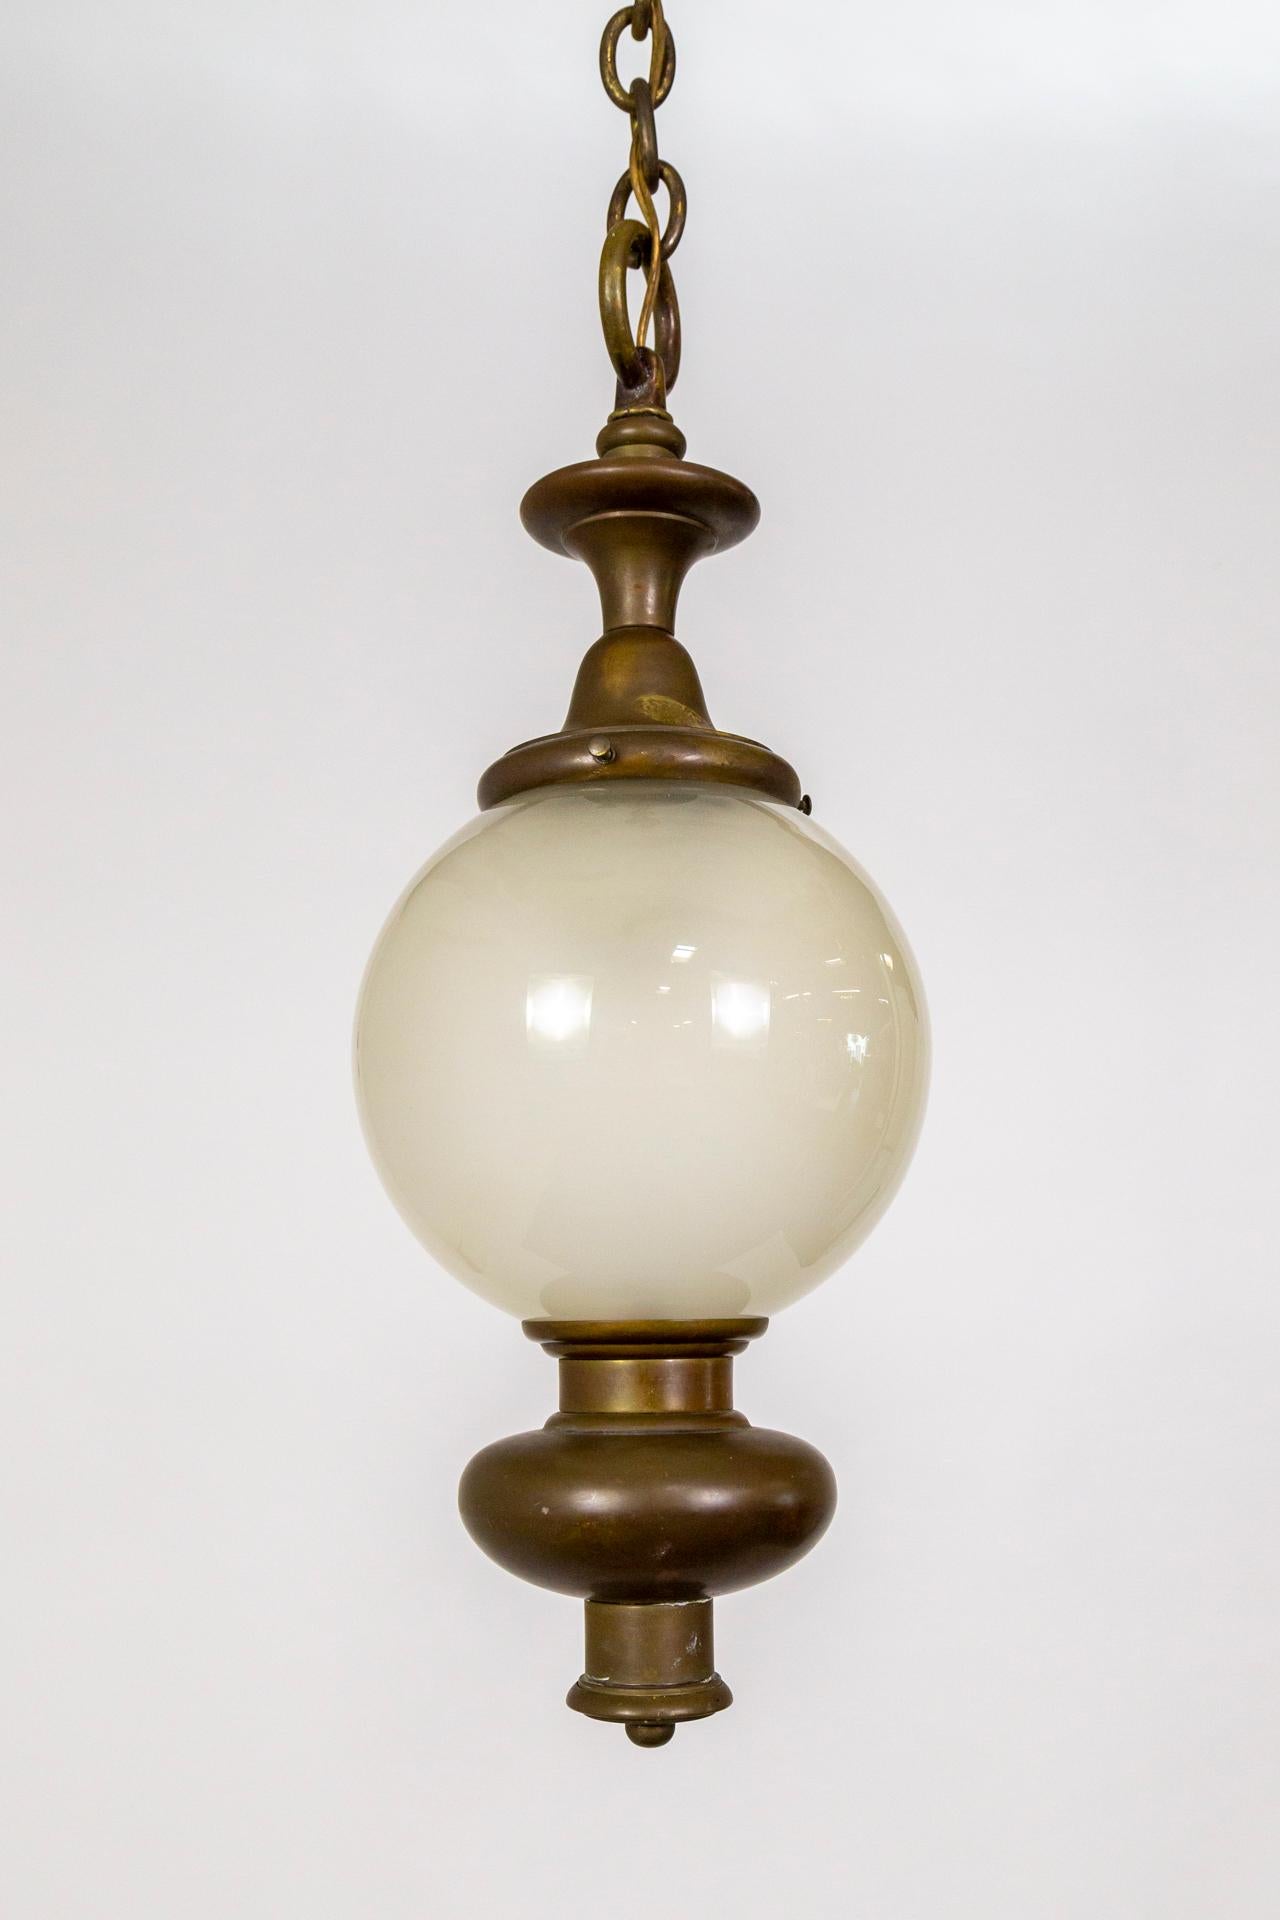 20th Century Antique Hanging Lantern w/ Frosted Globe Shade